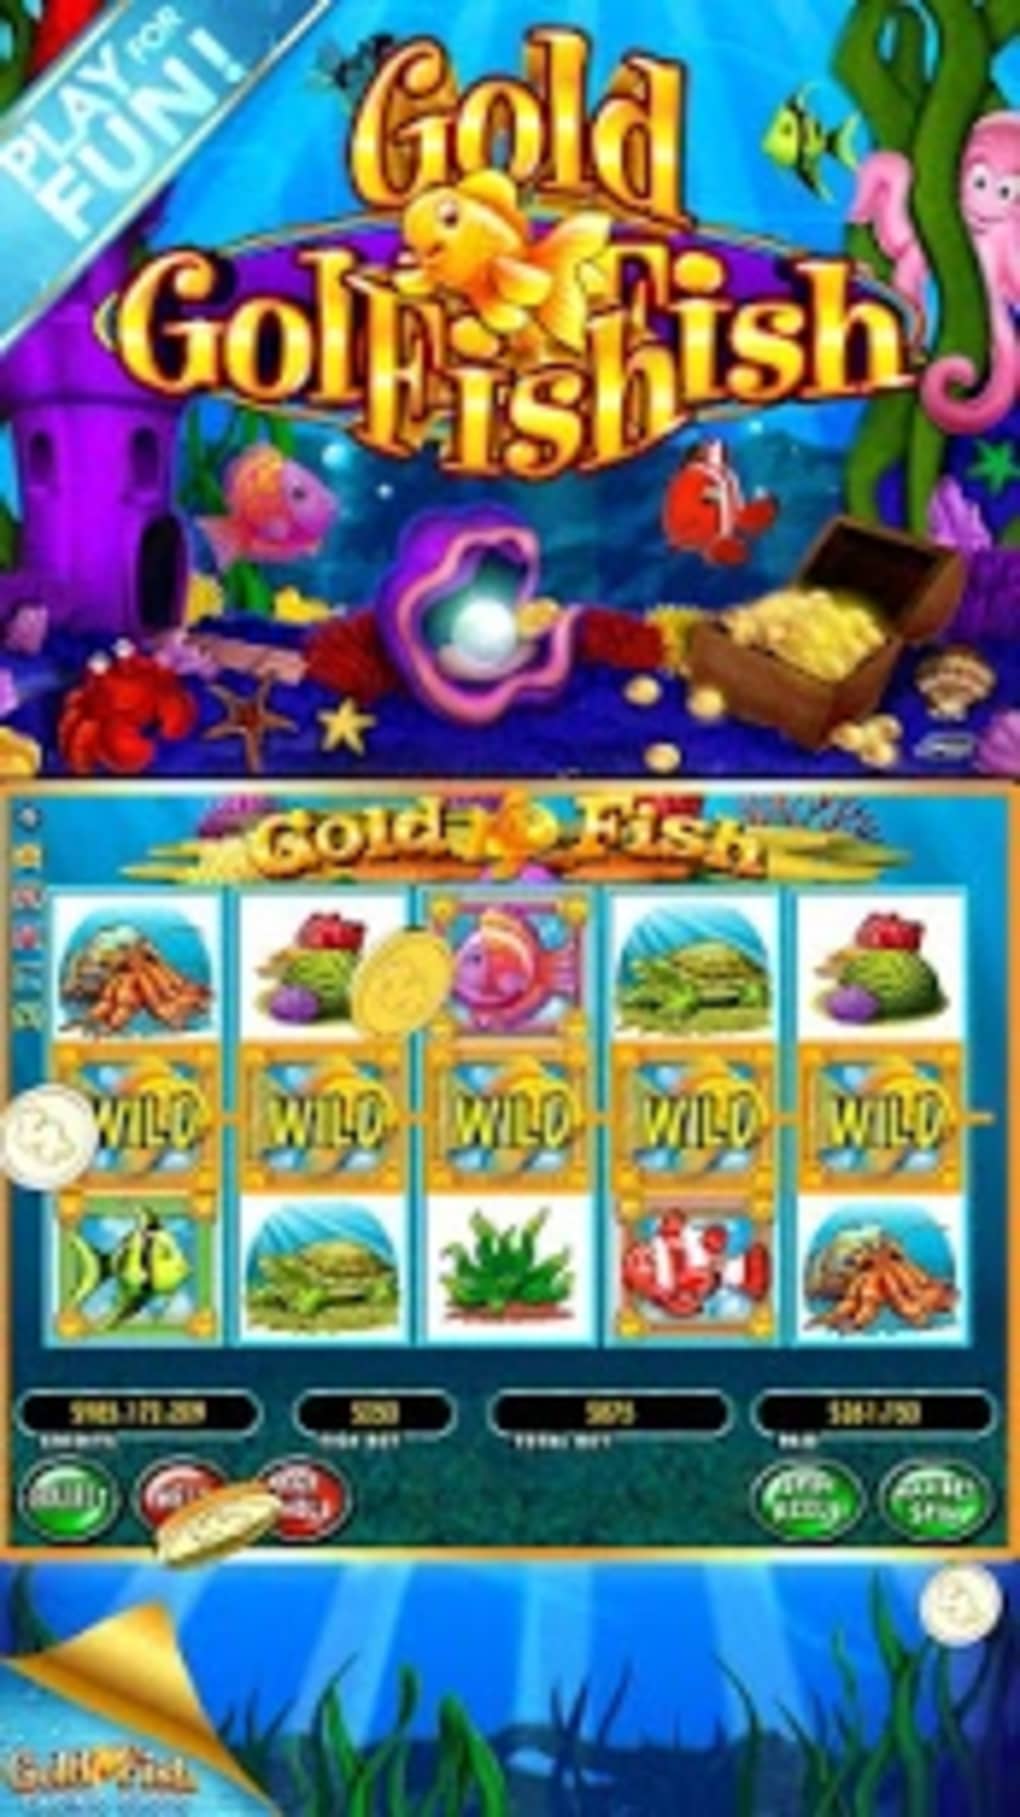 what online casino is like gold fish